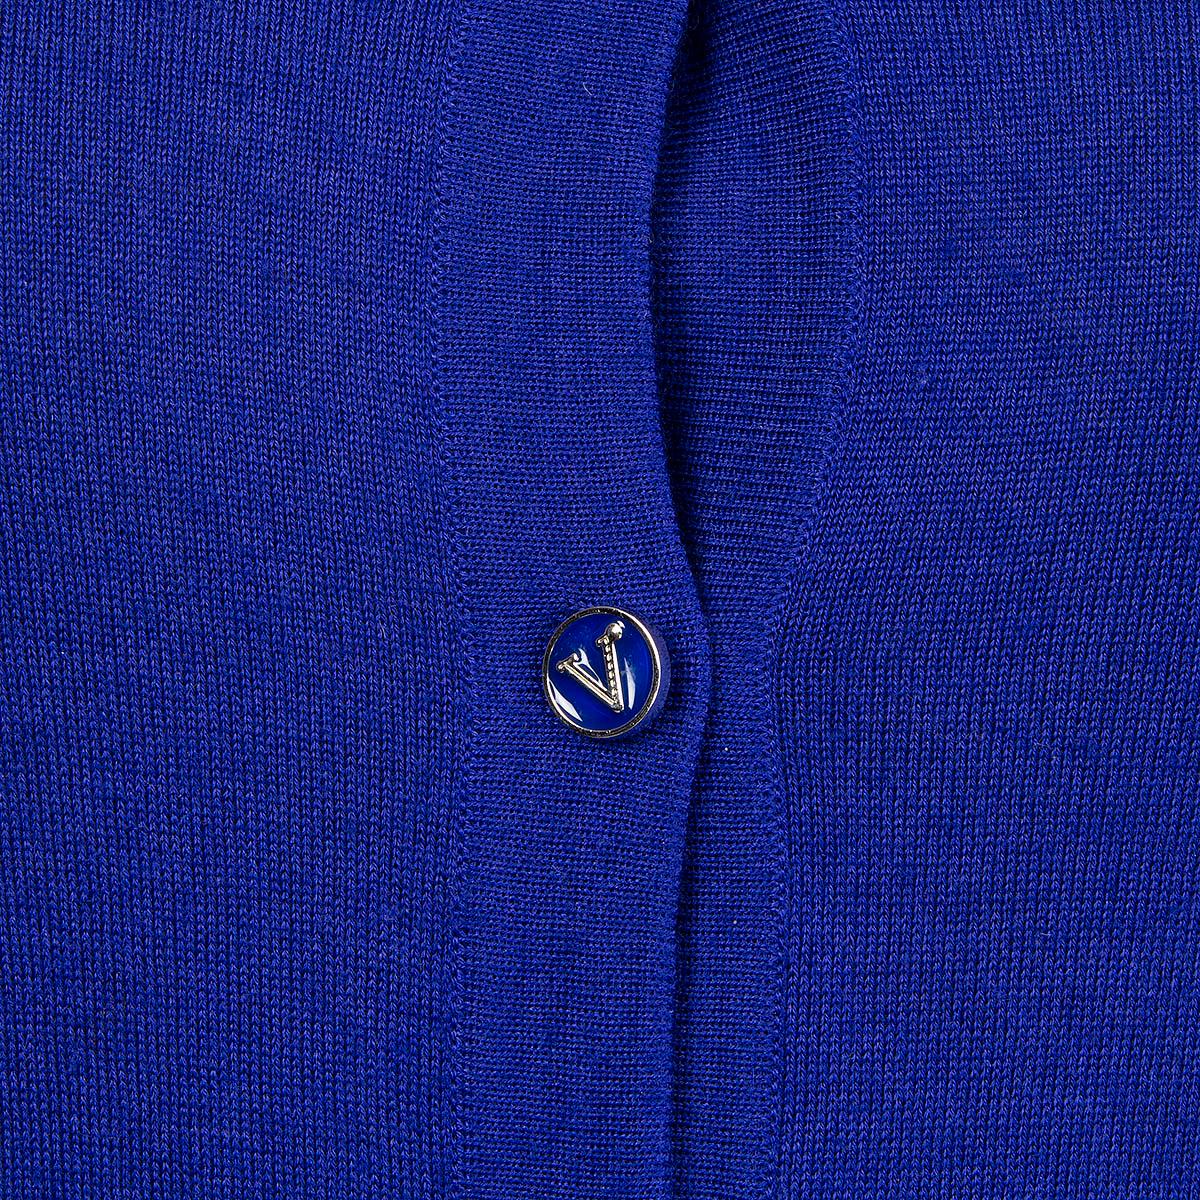 Women's VERSACE royal blue cashmere silk BUTTON FRONT Cardigan Sweater 40 S For Sale